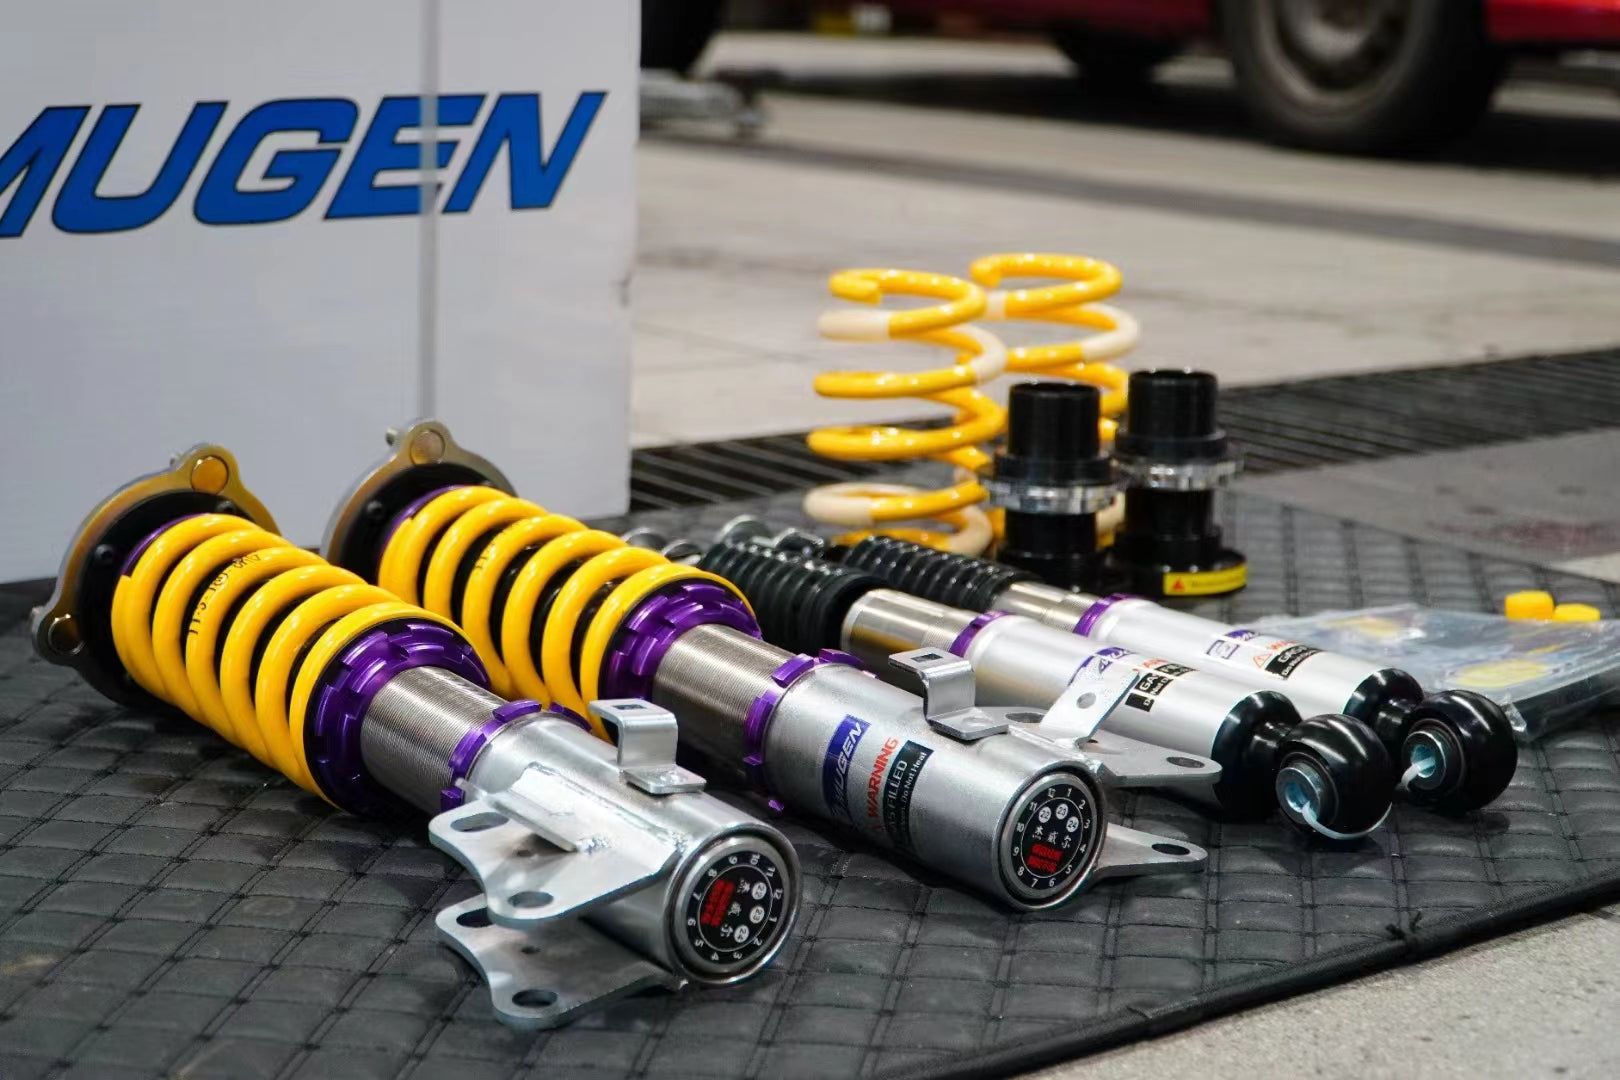 Gd Mugen Mazda Mazda6 03-up Gg3s/gg3p Street Comfort Pro Coilovers